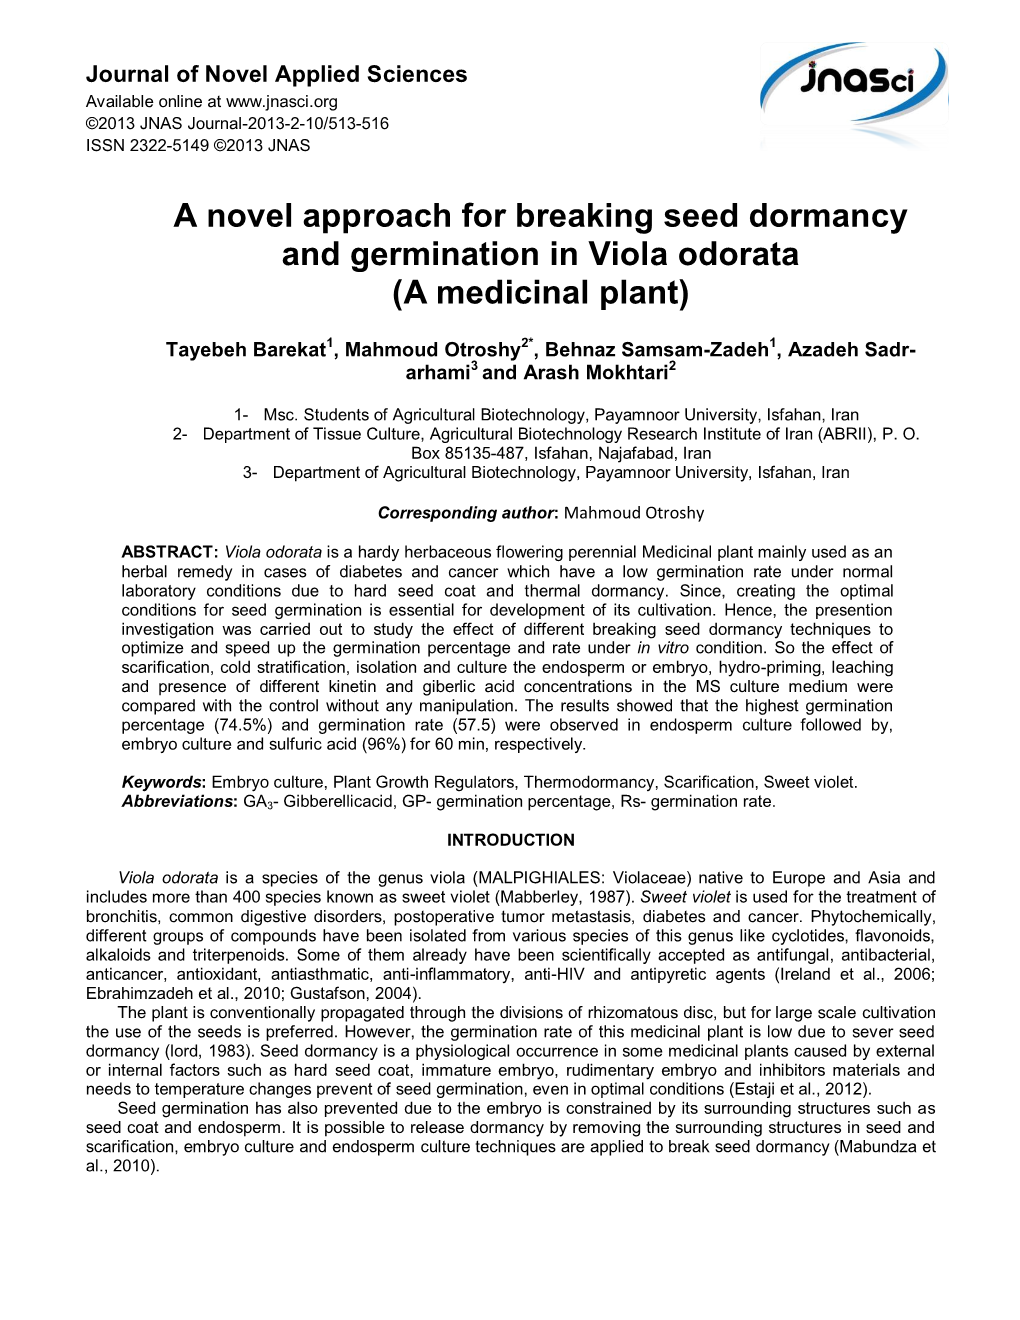 A Novel Approach for Breaking Seed Dormancy and Germination in Viola Odorata (A Medicinal Plant)